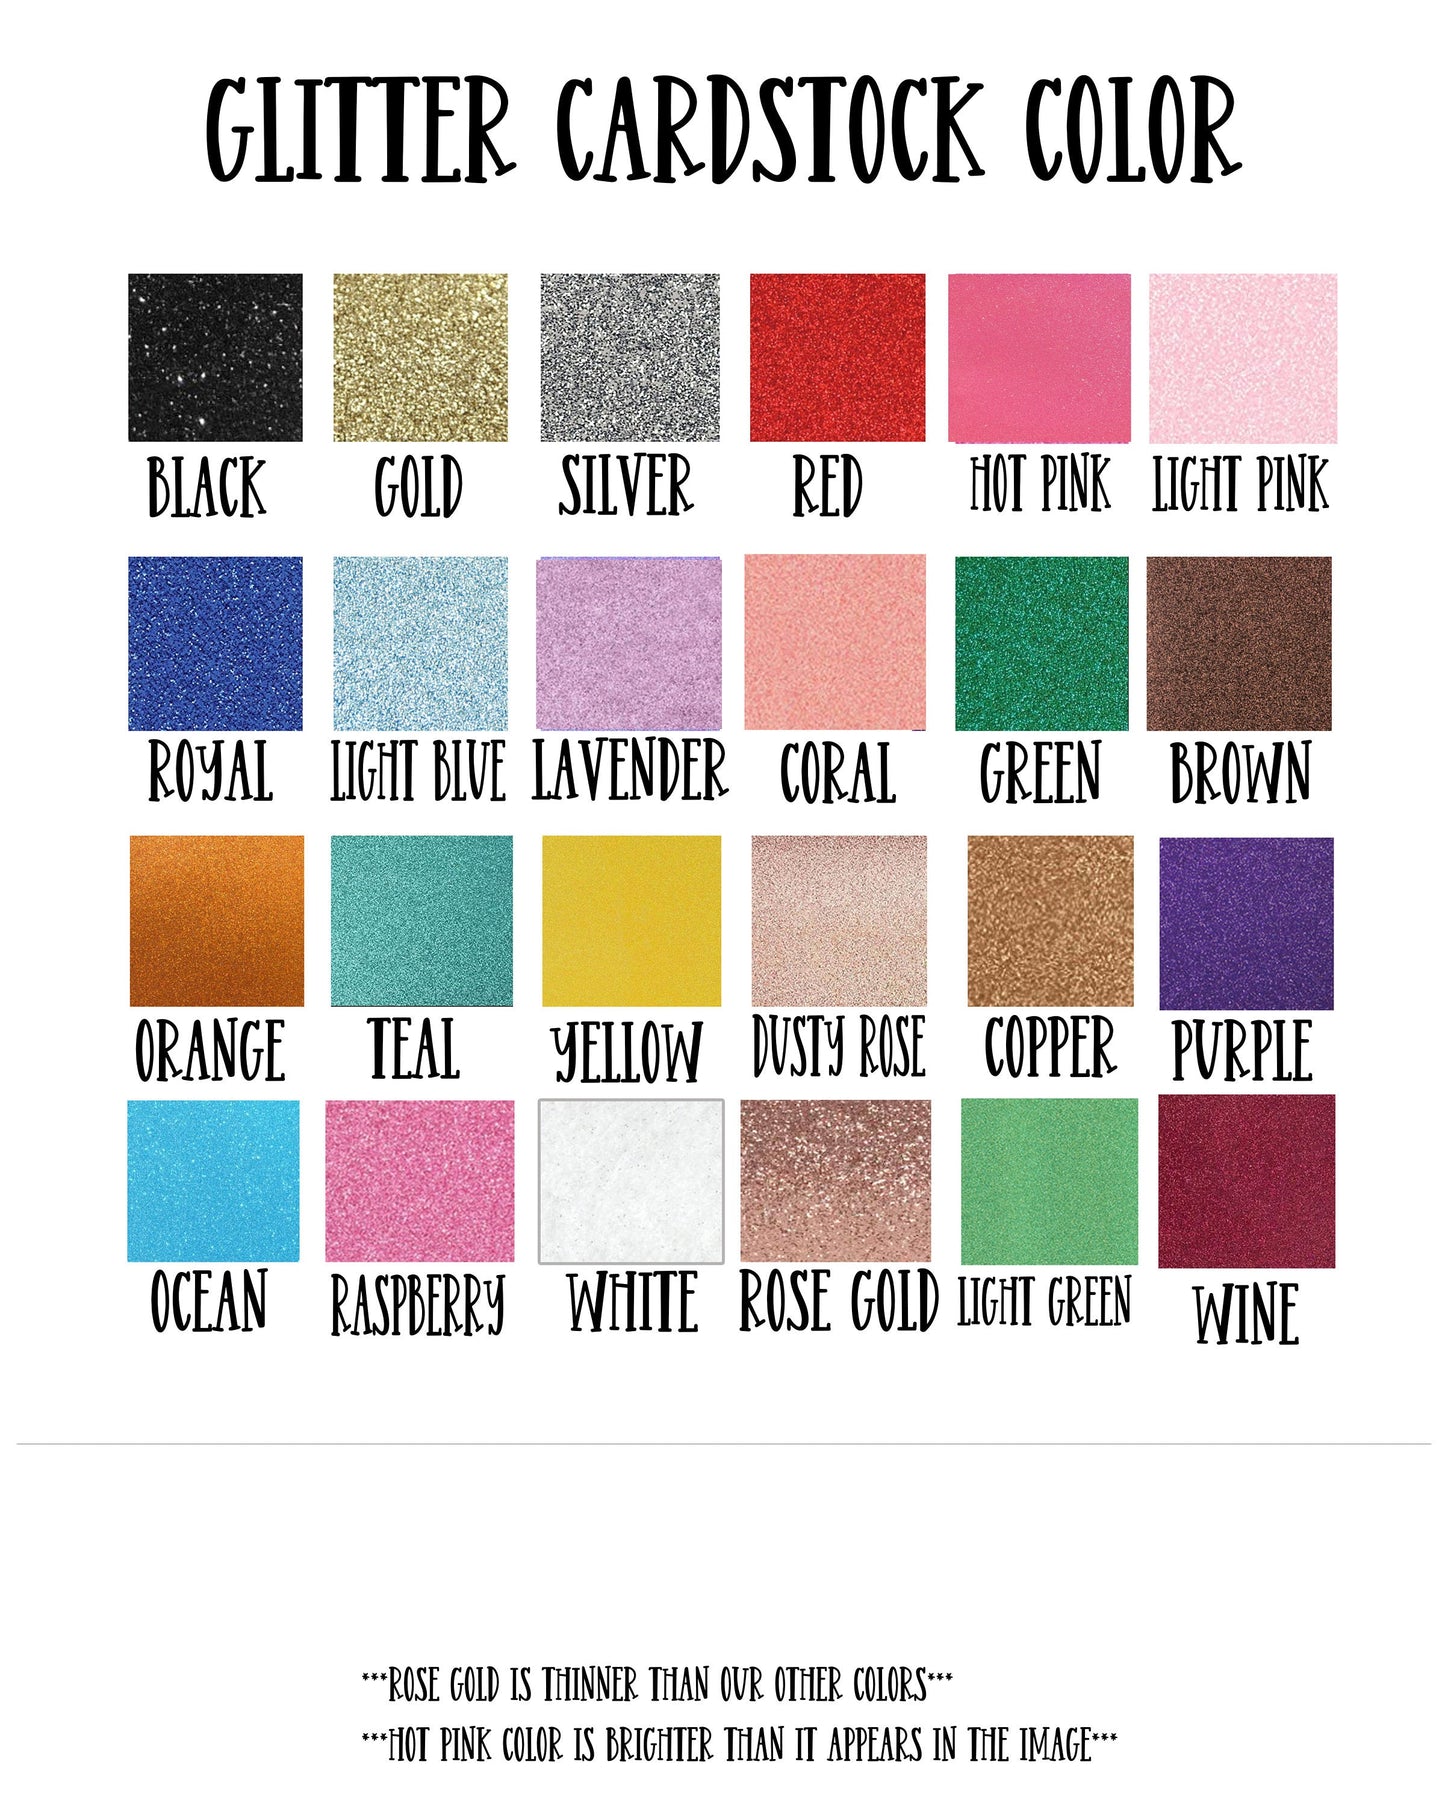 a poster with different colors of glitter cardstock color